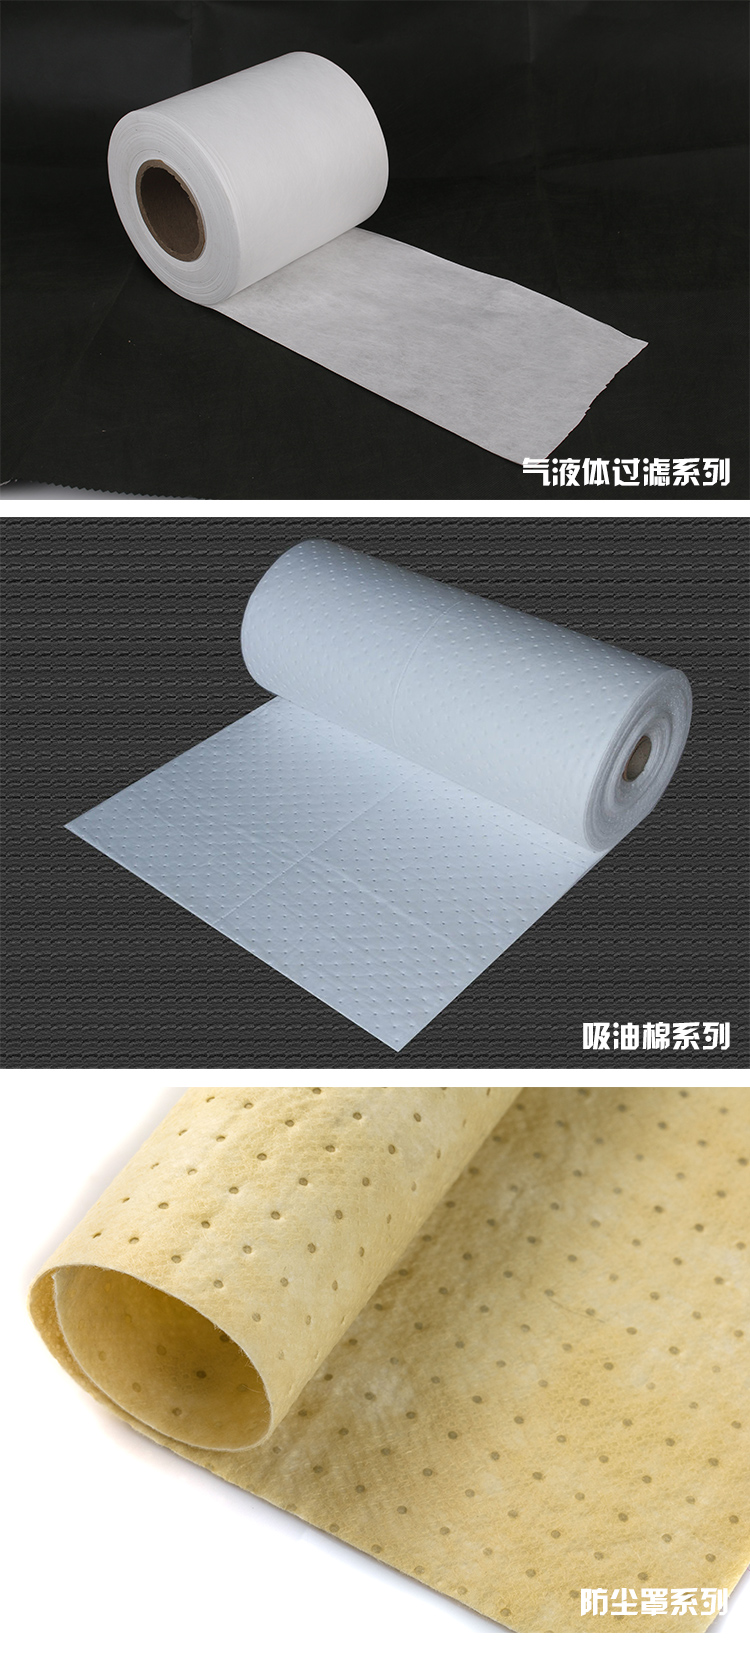 Supply disposable wiping cloth kitchen supplies for cleaning fruits and vegetables MSM hydrophilic cloth